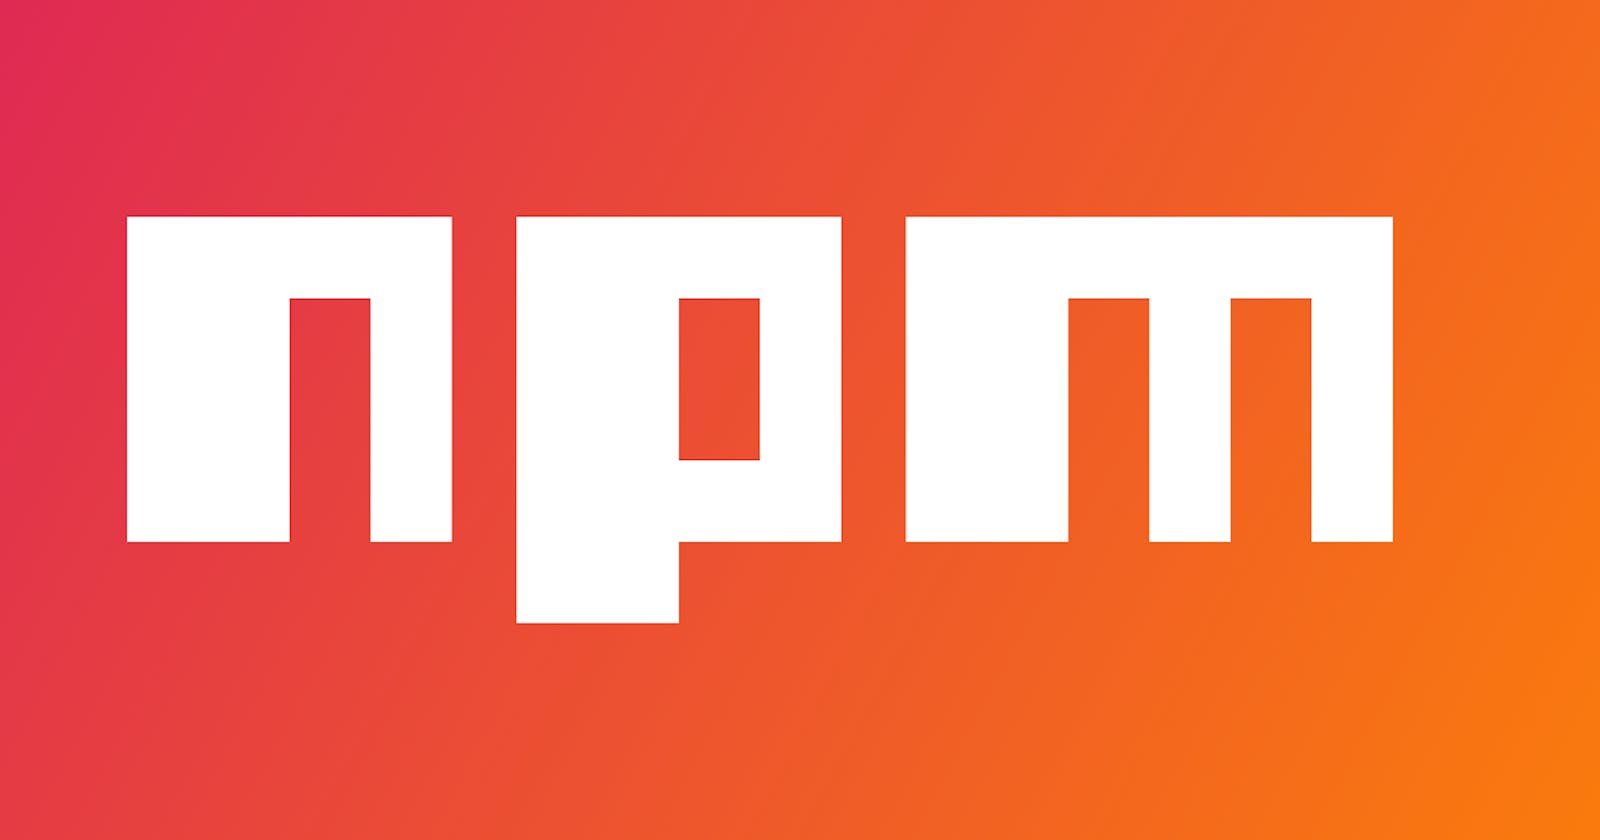 How to publish a CLI tool on NPM